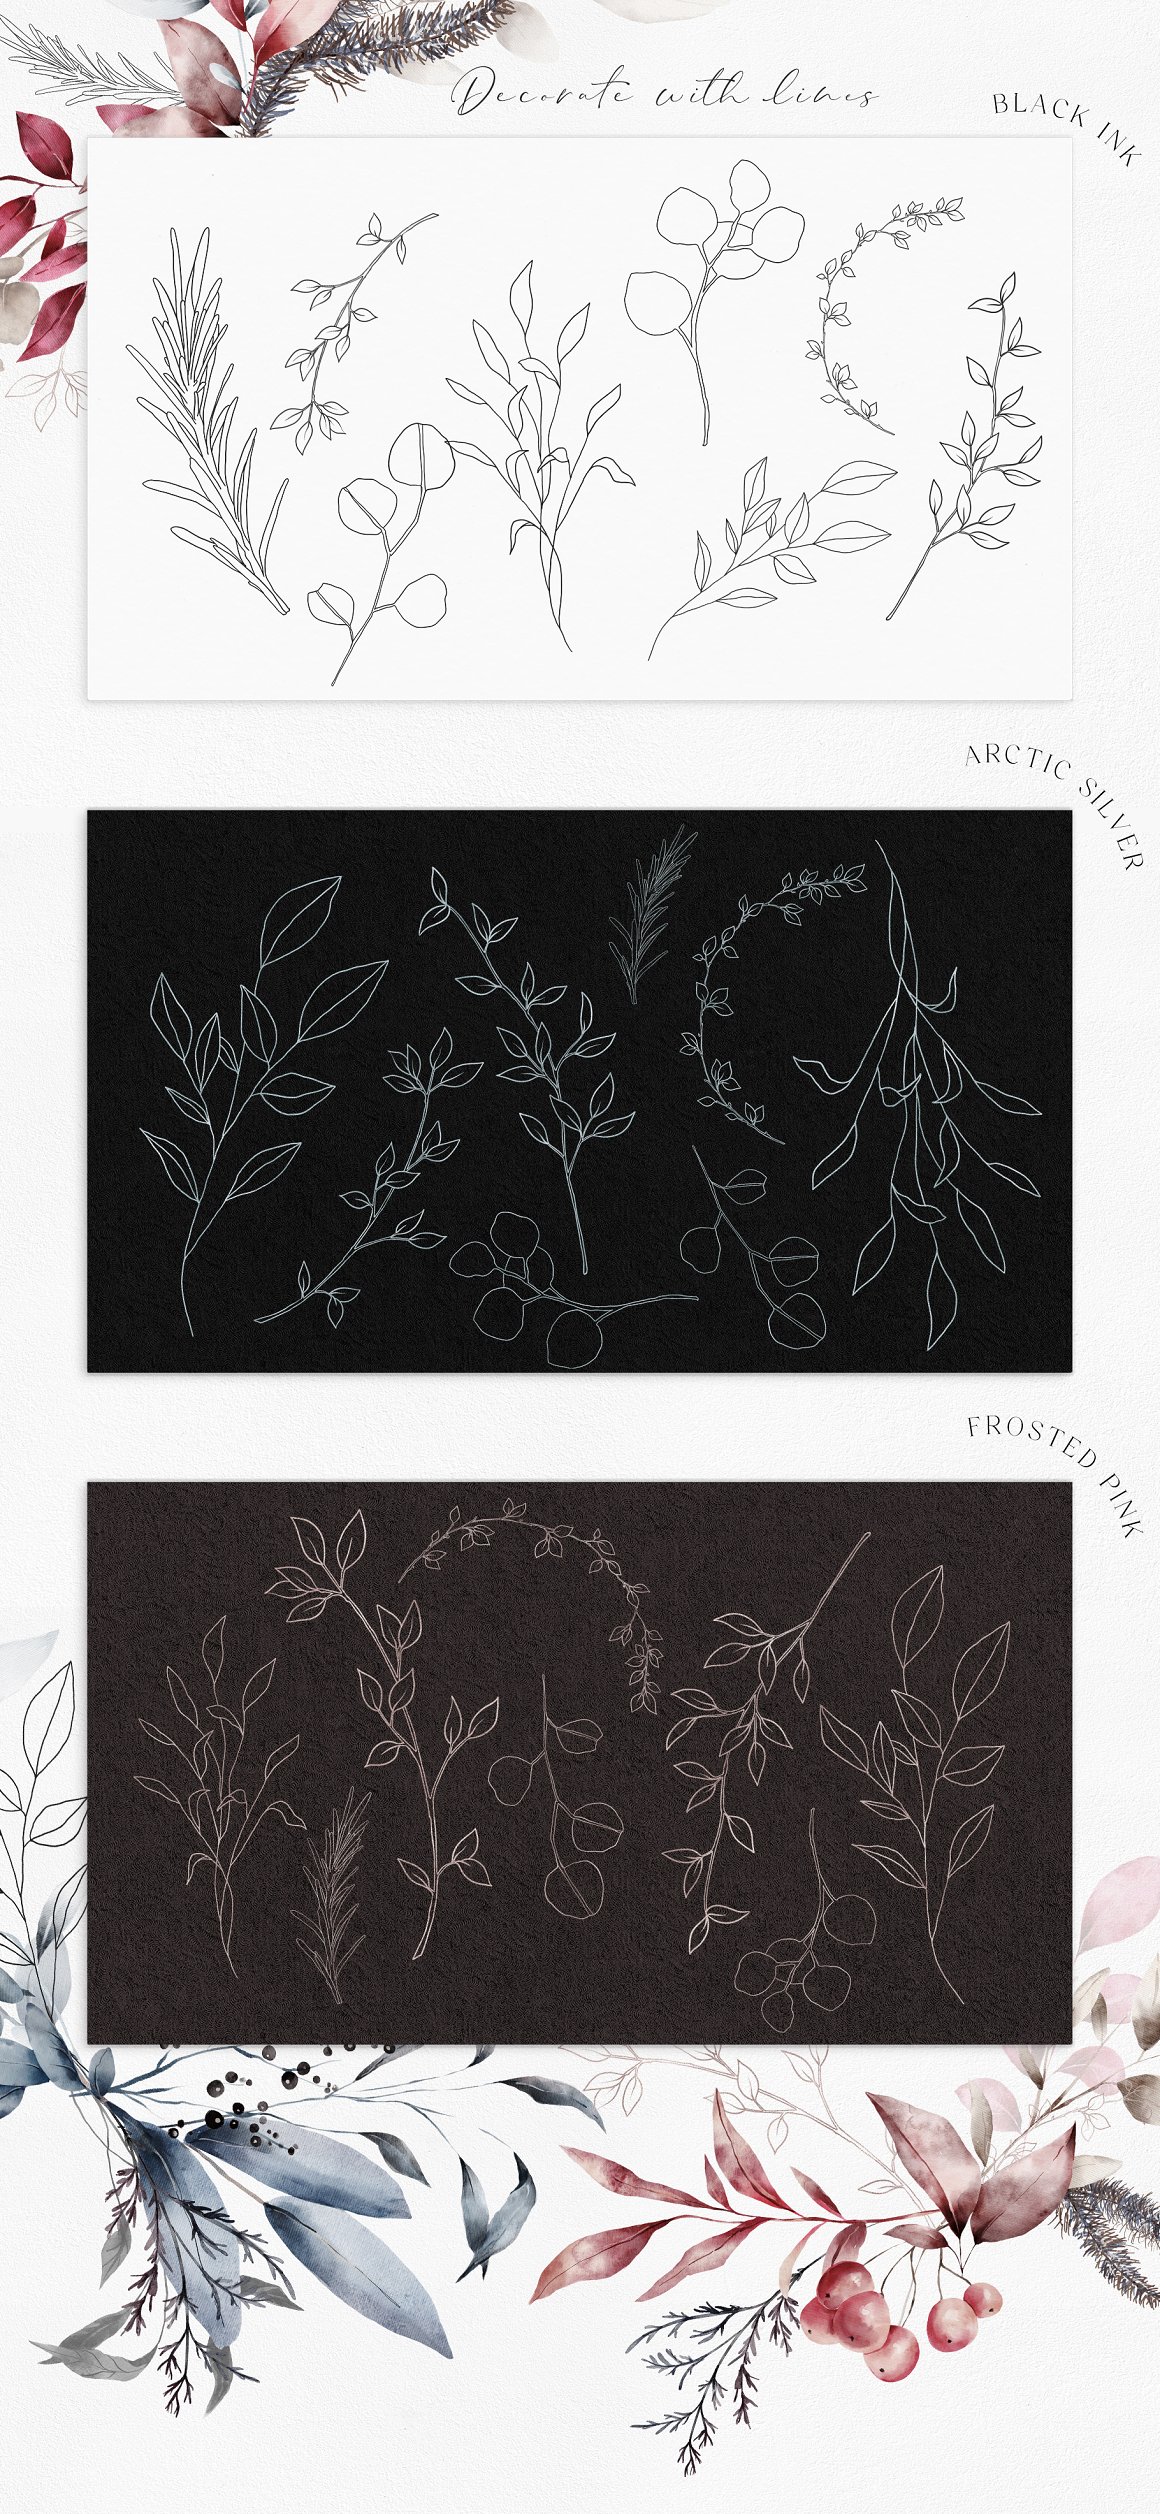 3 preview of illustrations of winter compositions in white and black.